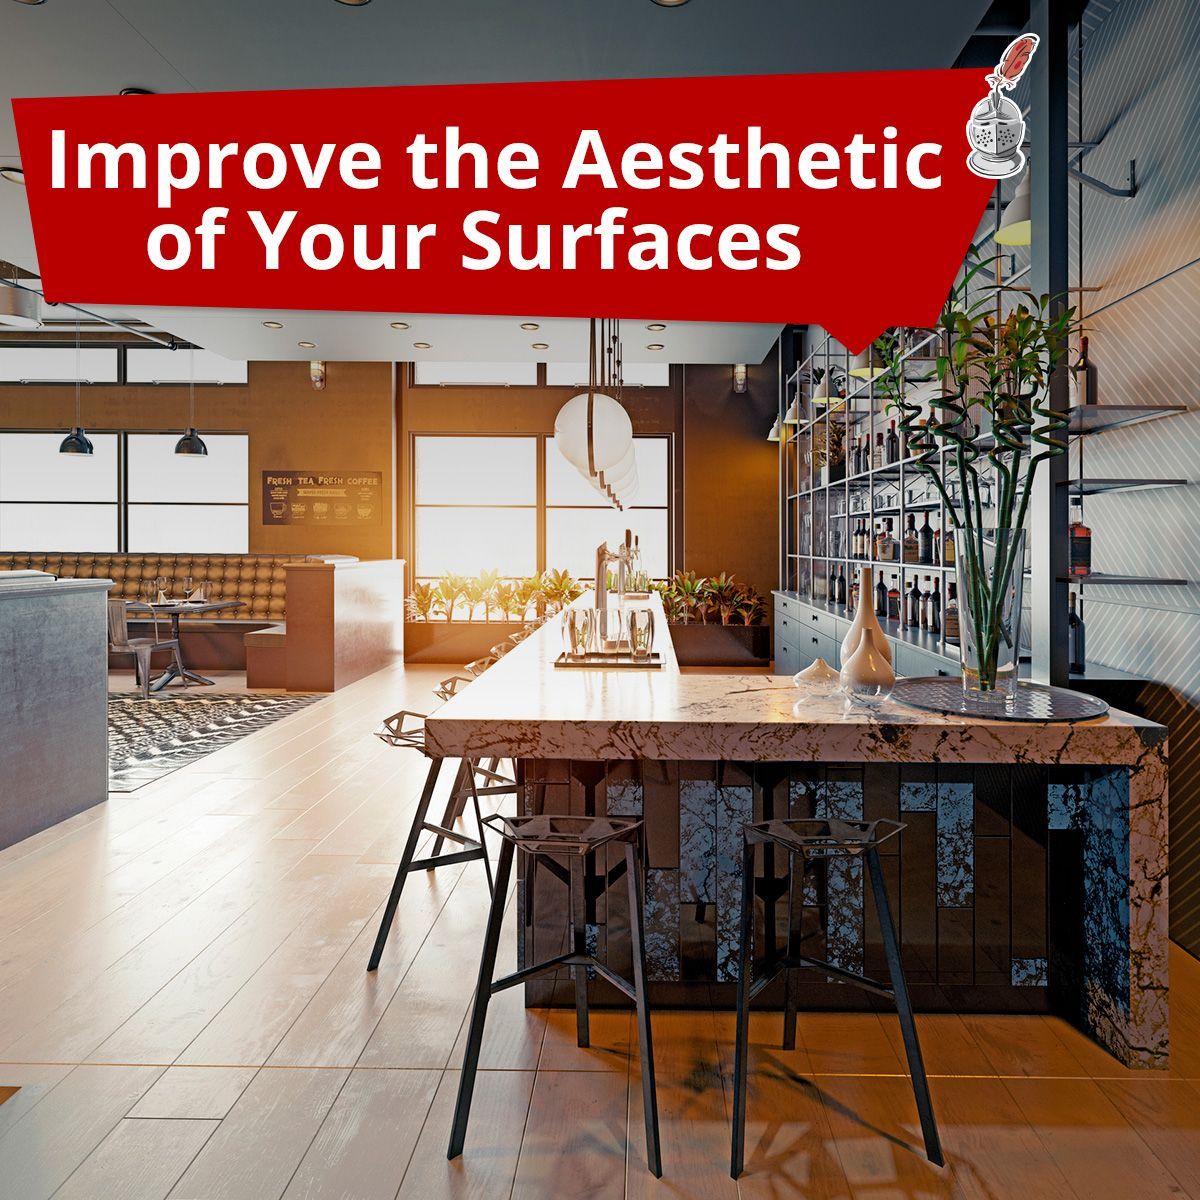 Improve the Aesthetic of Your Surfaces